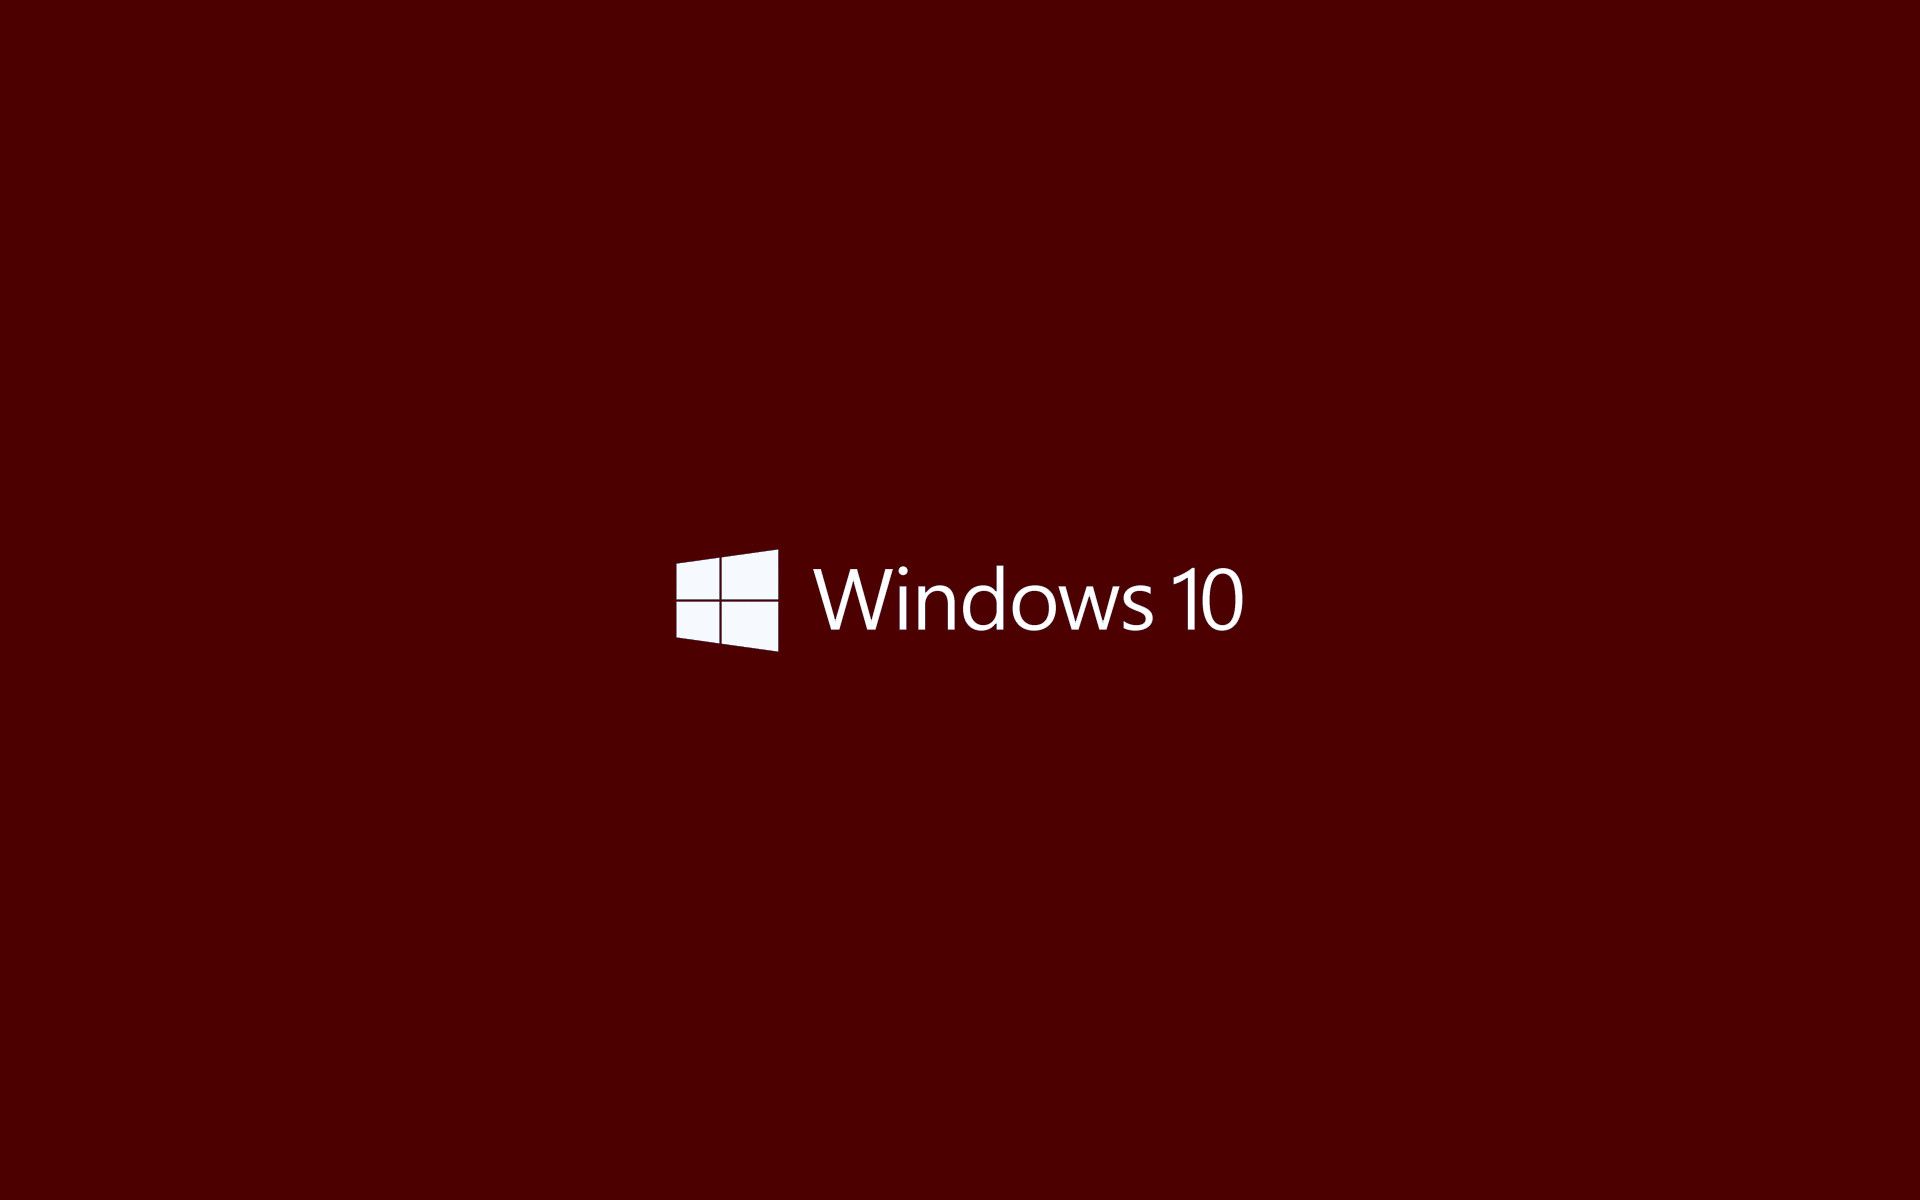 Windows 10 wallpaper on a red background - Windows 95